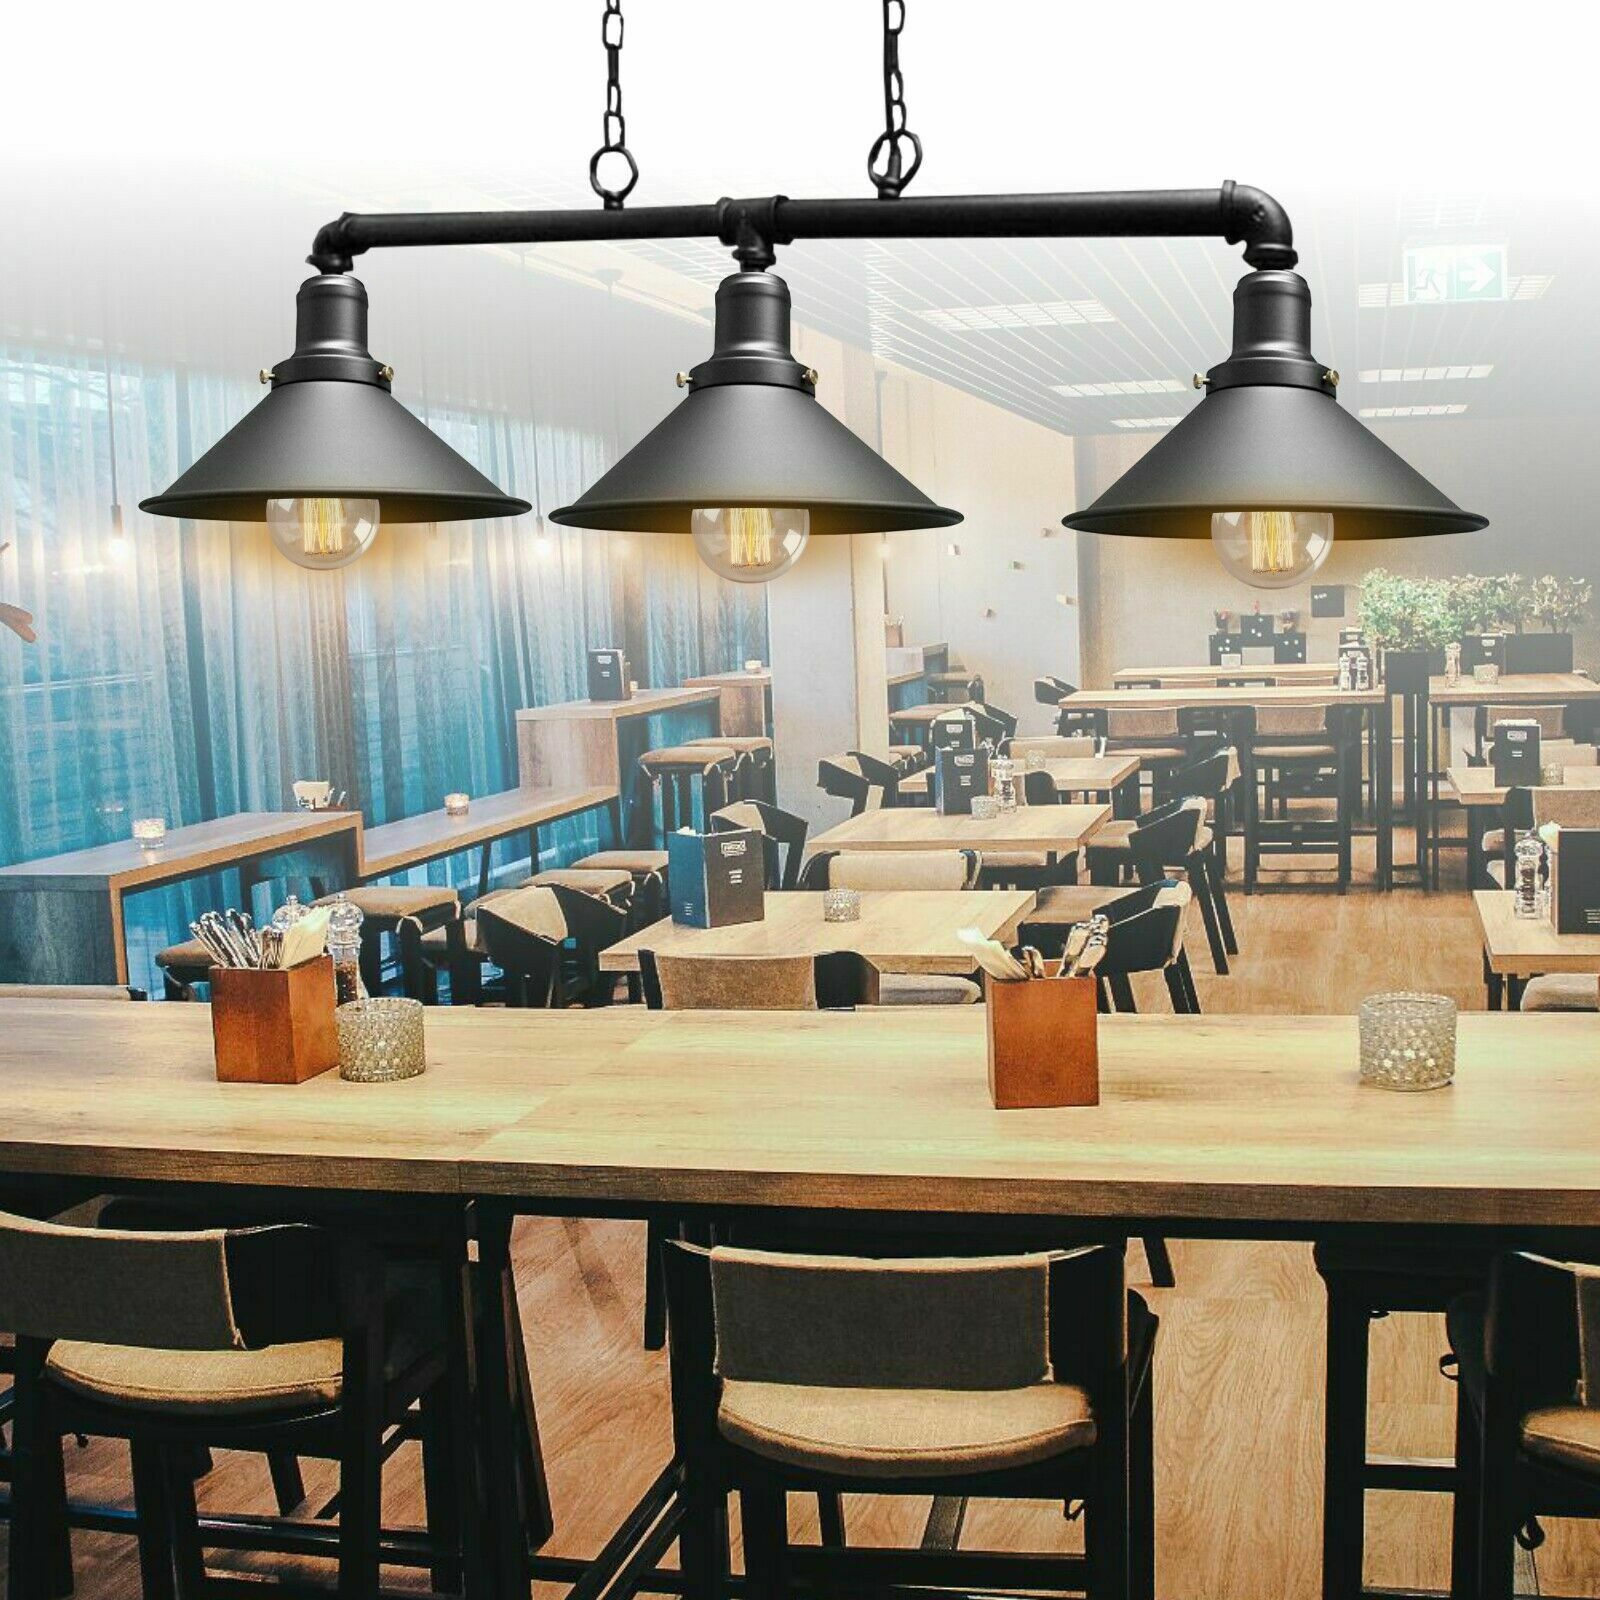 Vintage 3Way Suspended Ceiling Steampunk Pipe Pendant Lights-Application Image